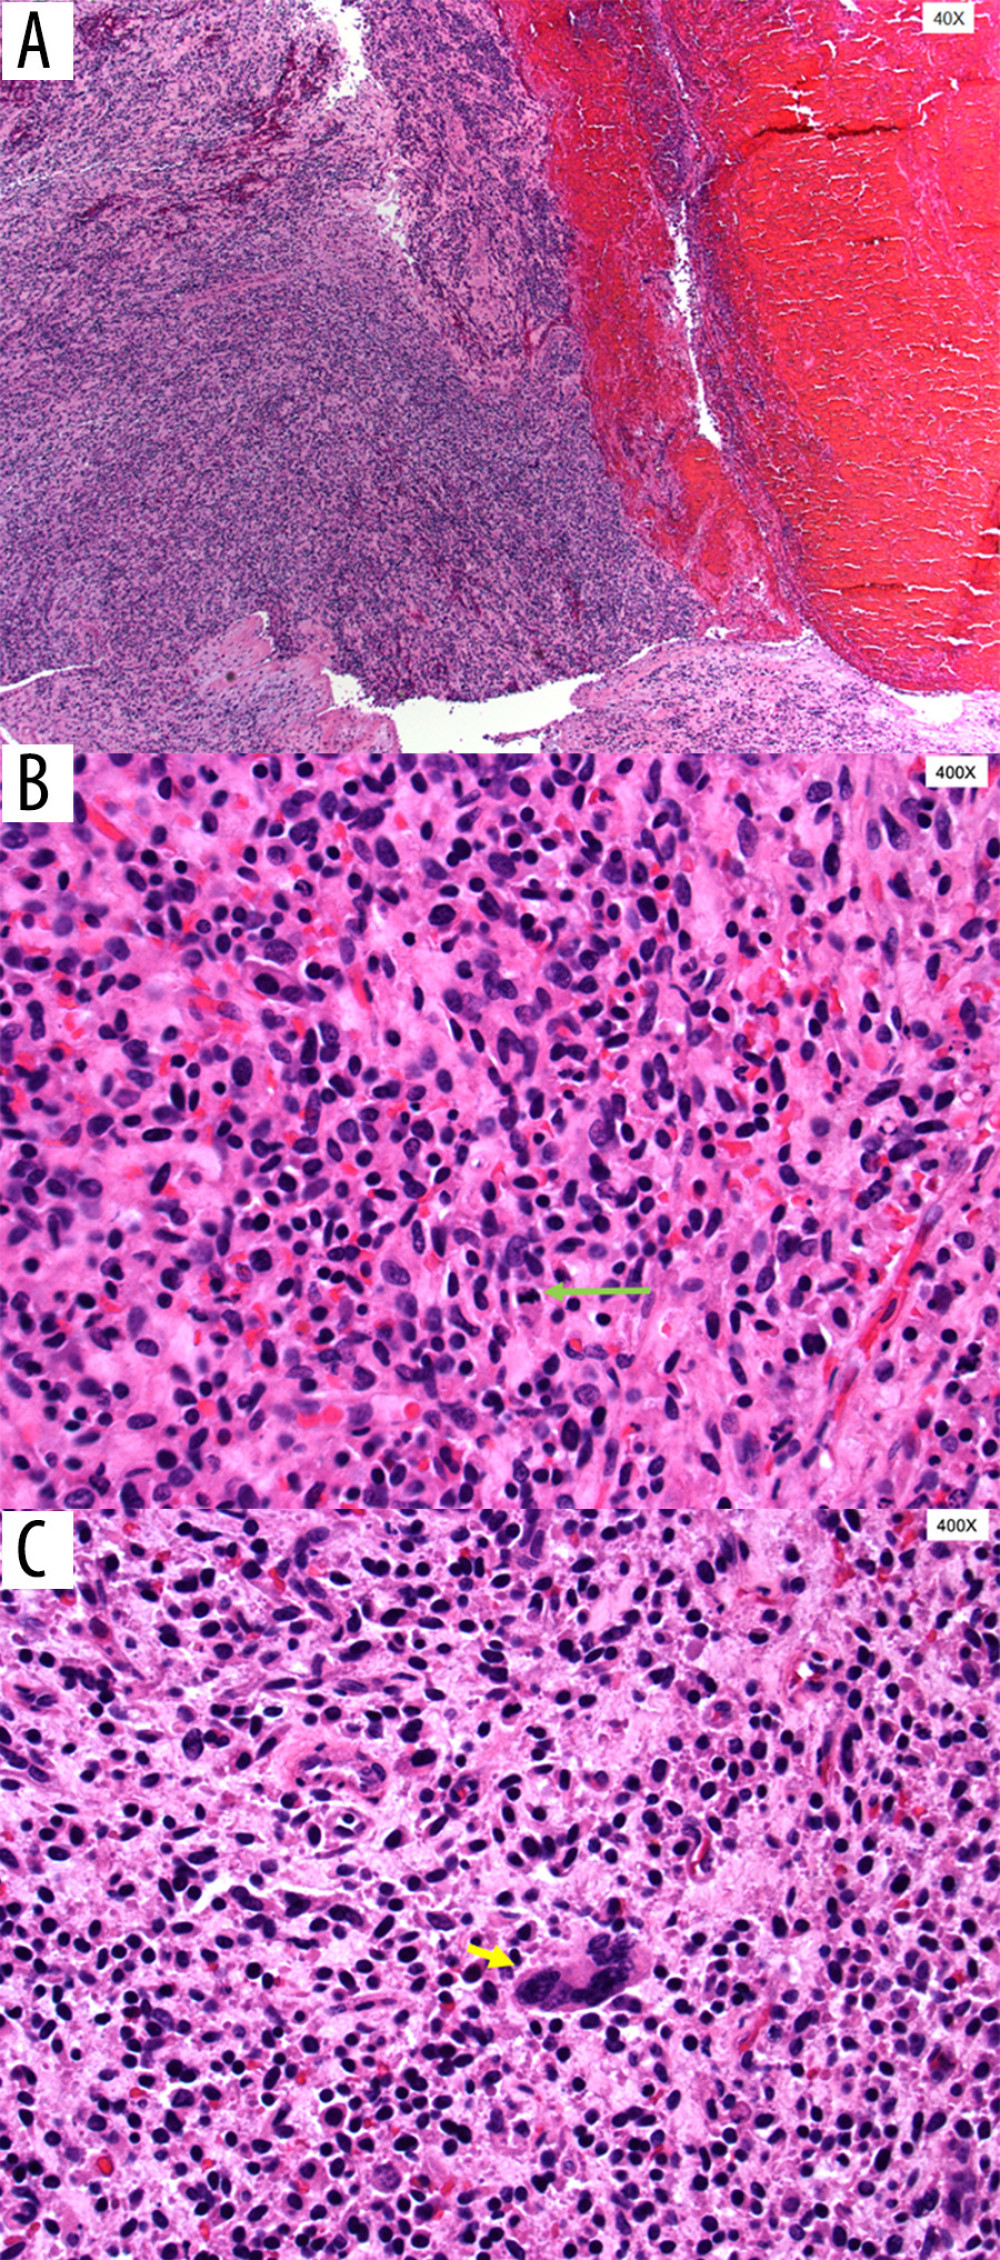 (A) Hypercellular tumor emboli associated with organizing fibrin and red blood cells. (B) Numerous mitotic figures (green arrow) are present in addition to scattered focal necrosis. (C) Malignant cells with scattered nuclear pleomorphism (yellow arrow) show a spindled epithelioid morphology.